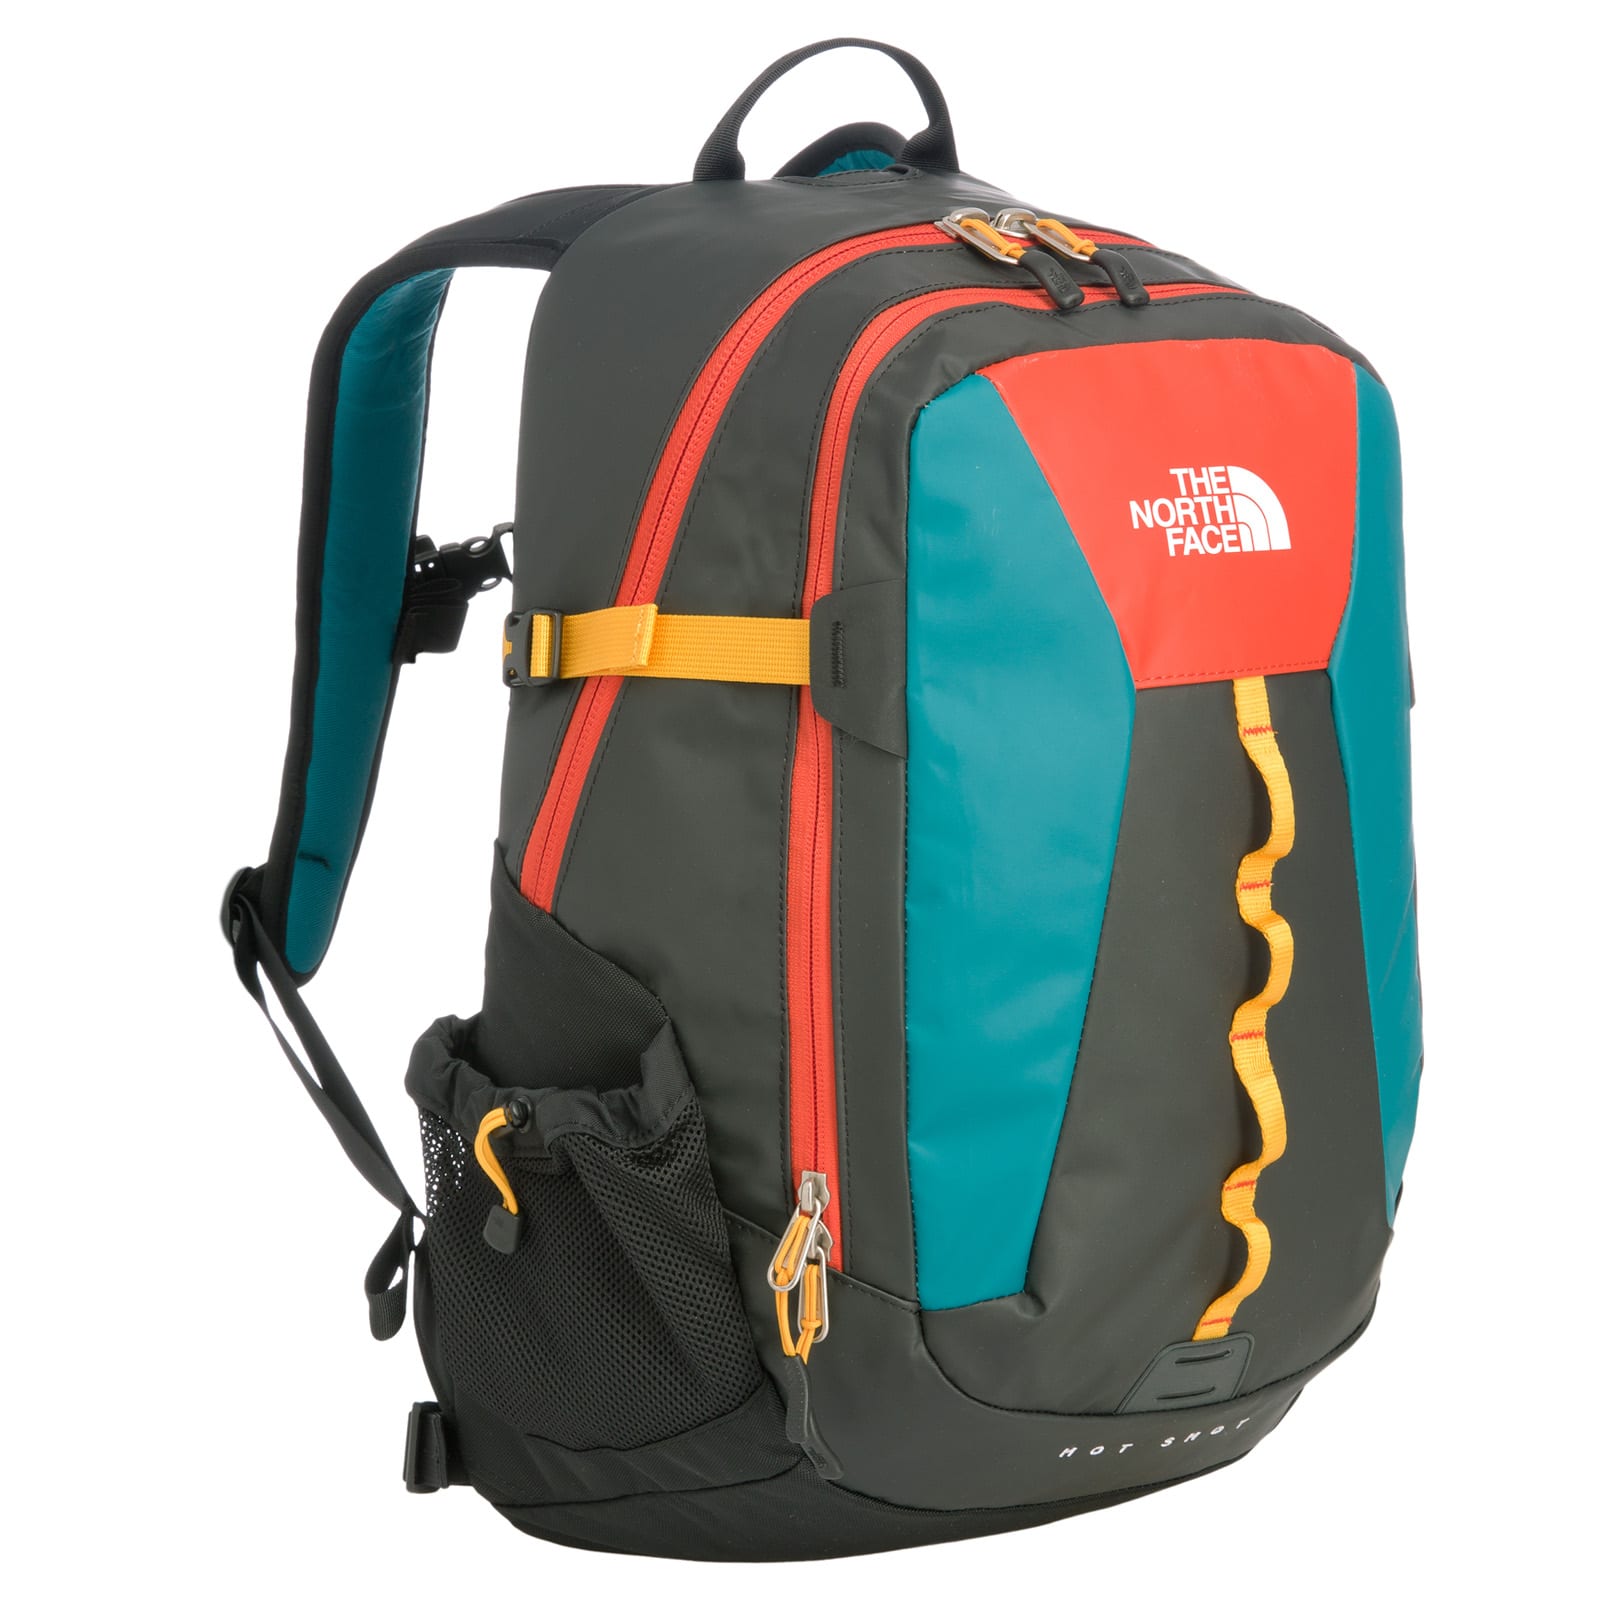 Buy The North Face Base Camp Hot Shot from Outnorth